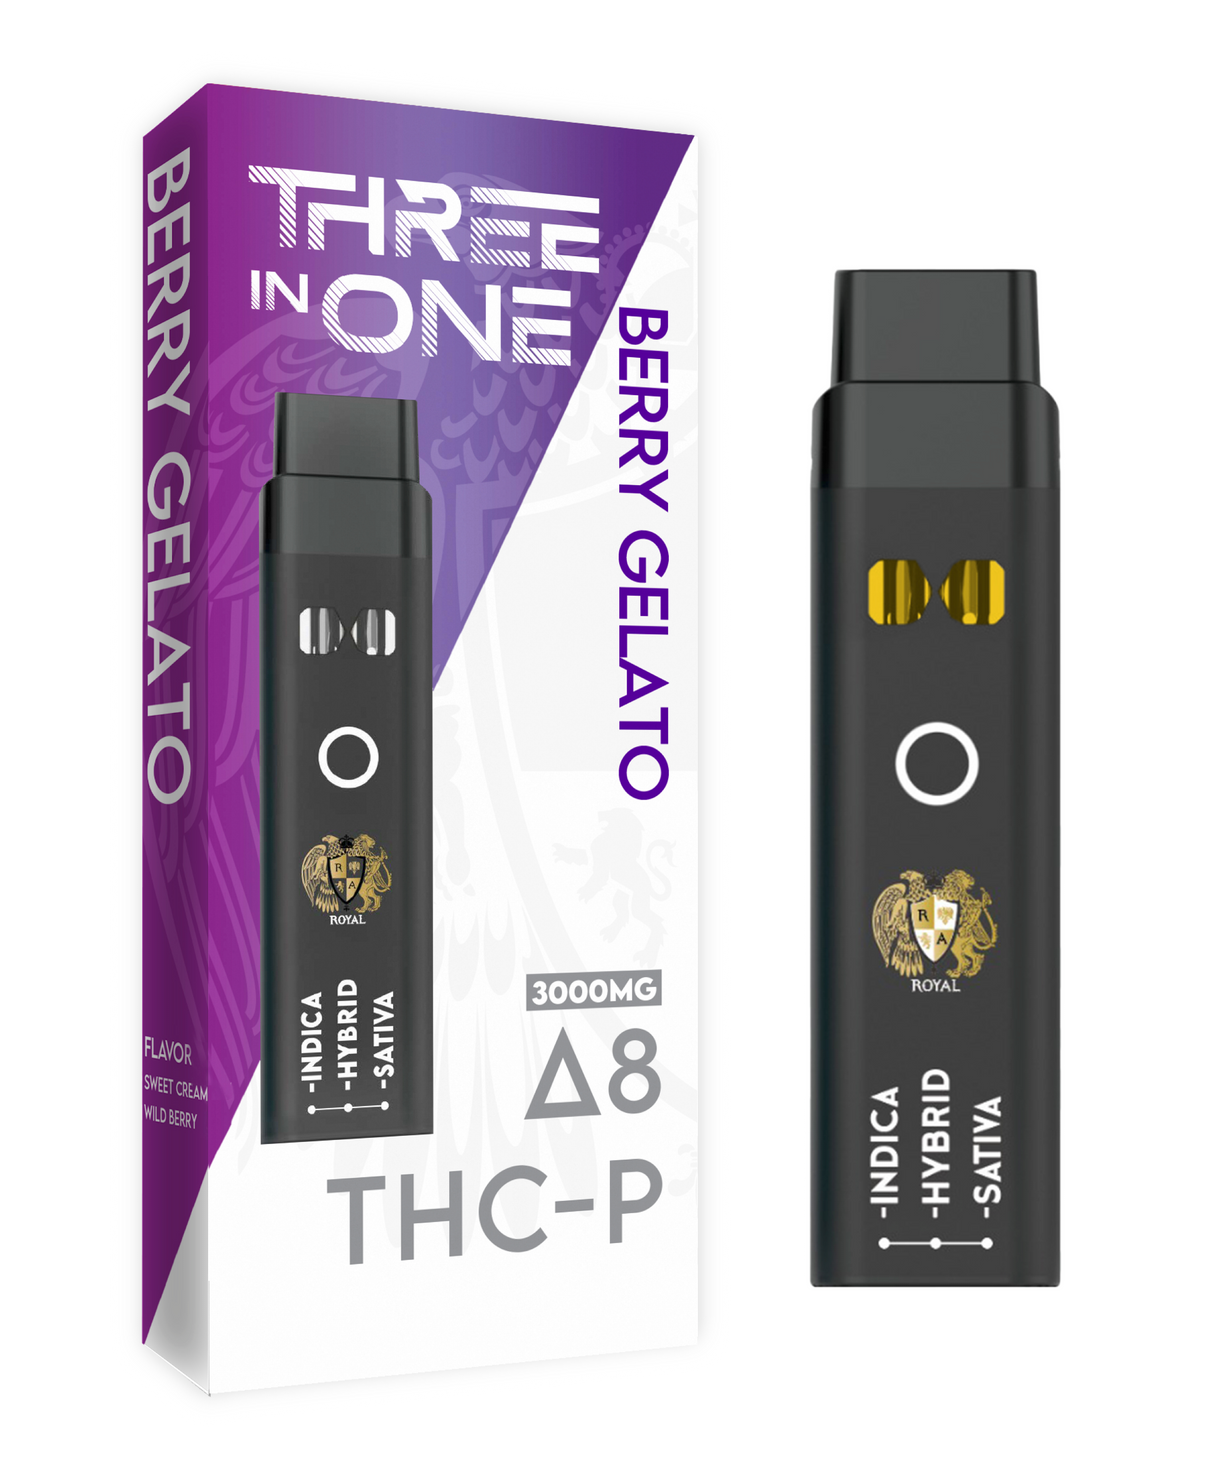 Delta 8 + THC-P Three-In-One Disposable Vape: Berry Gelato (3000MG)